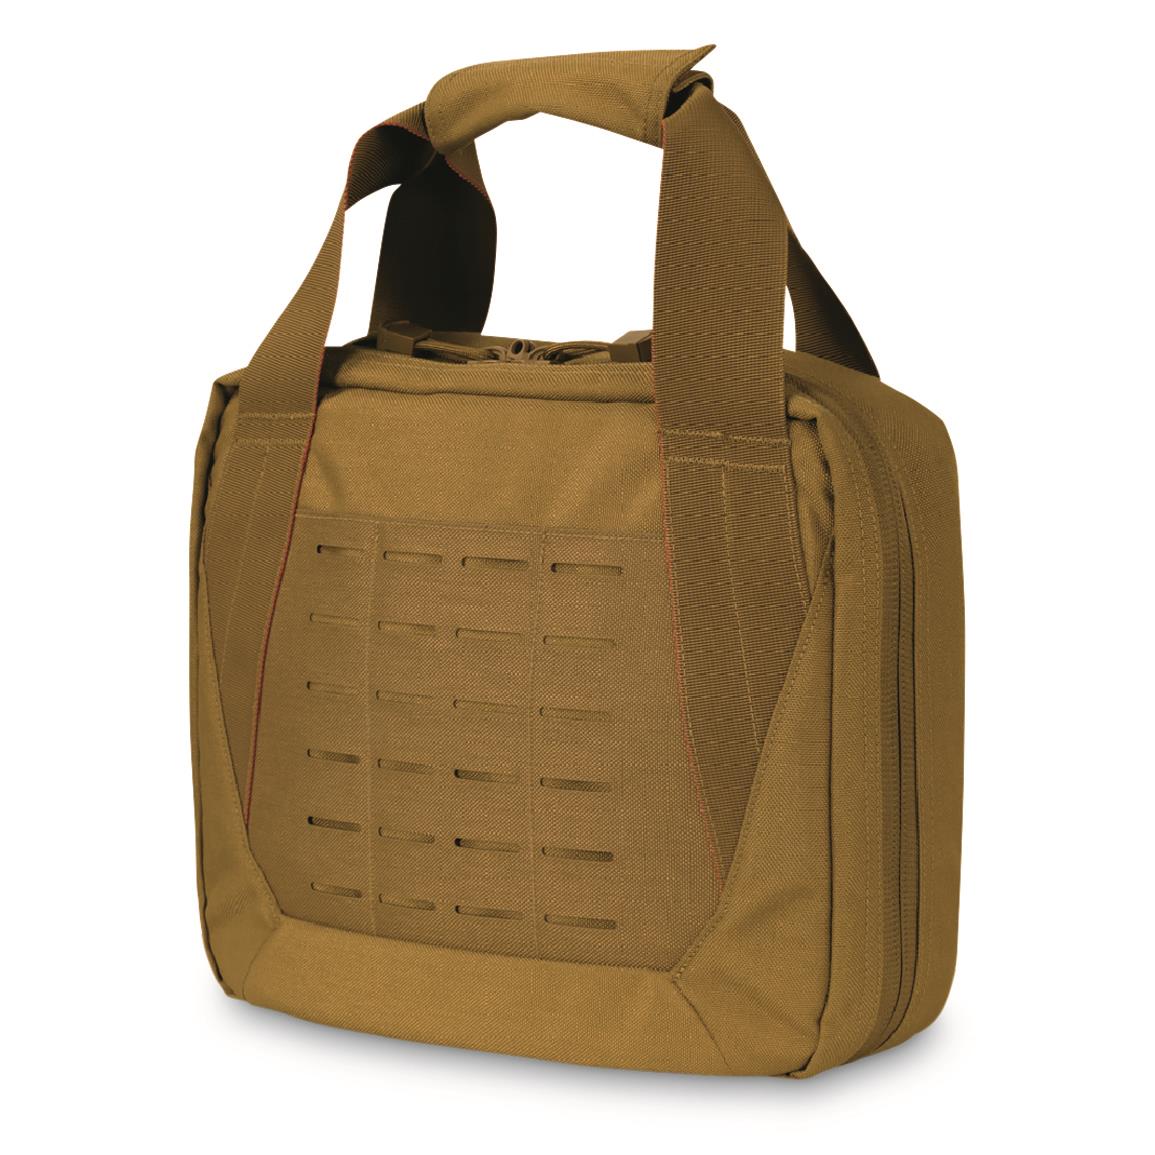 Exterior laser-cut MOLLE-compatible panel, Coyote Brown